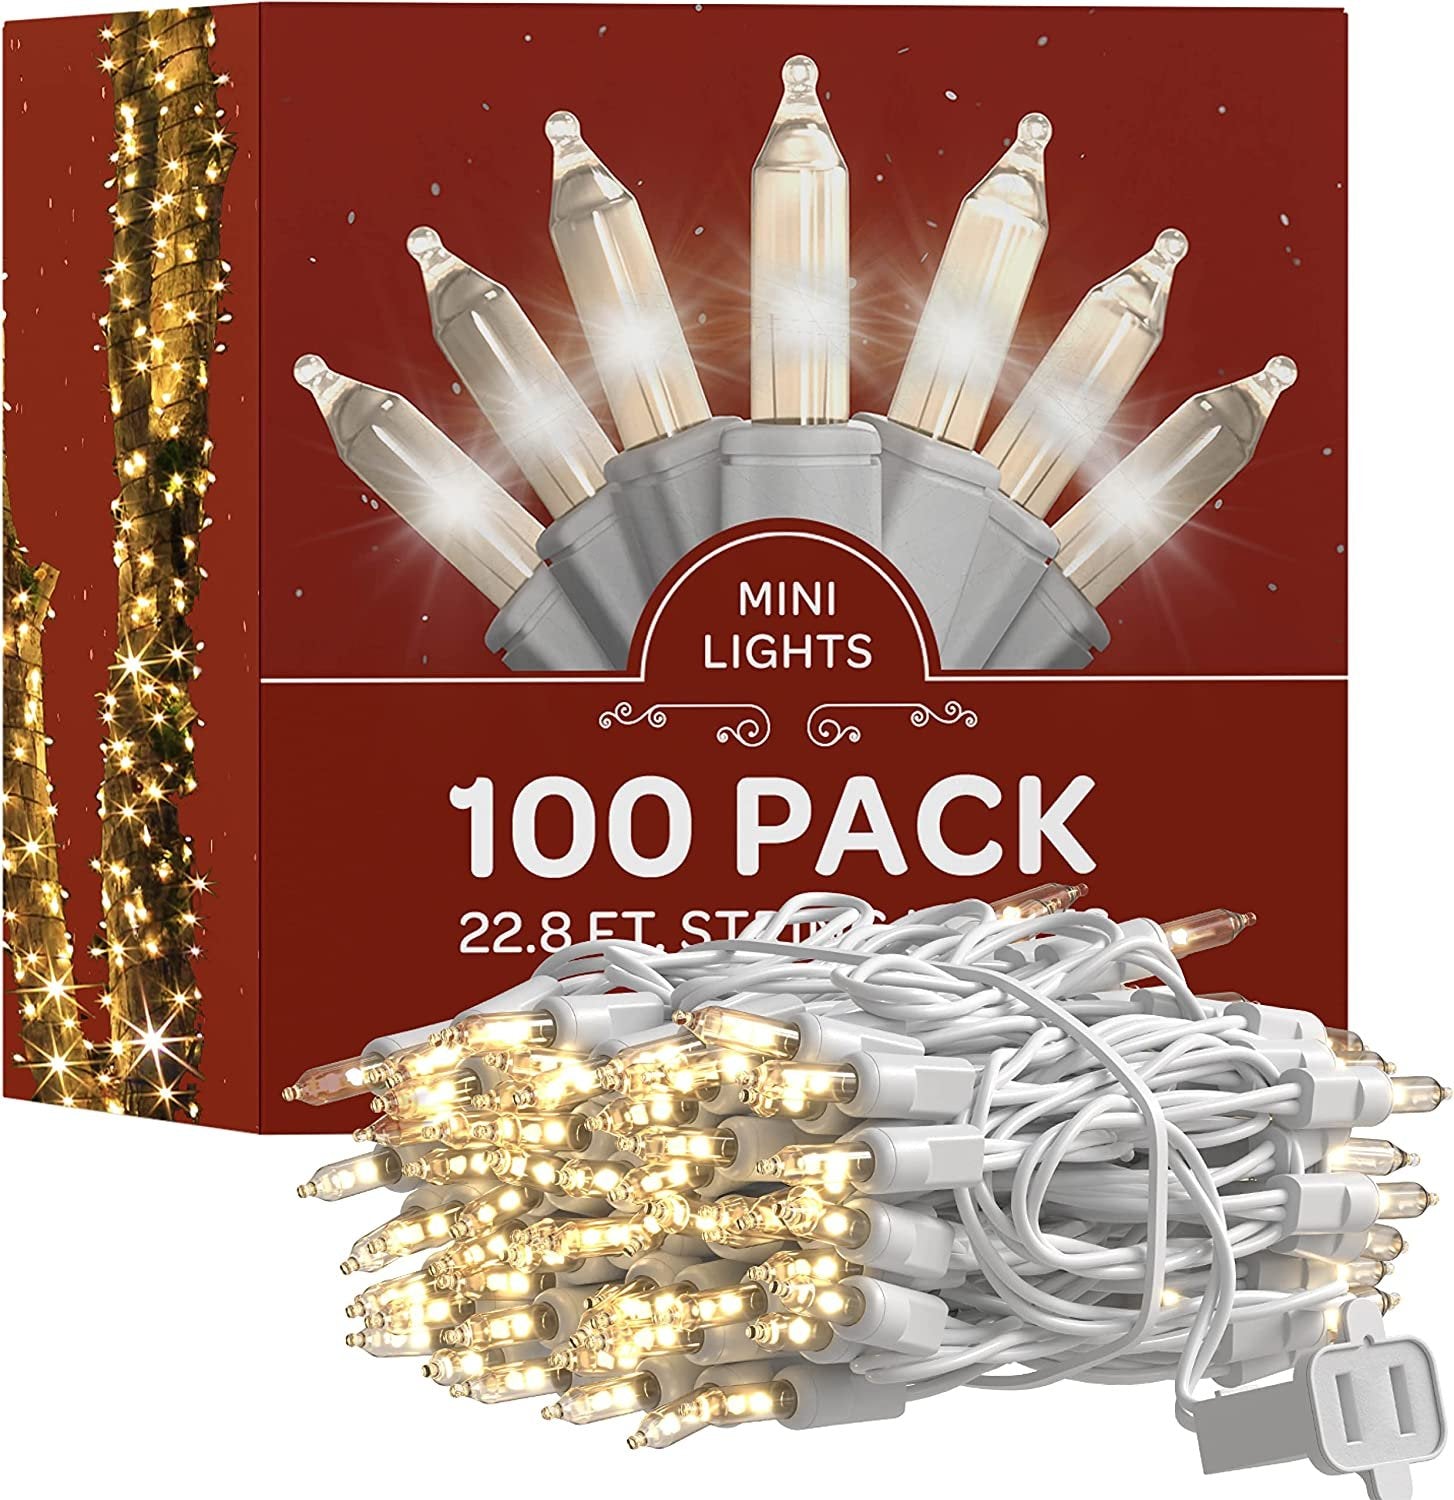 Christmas Lights [Set of 200] Warm White Christmas Lights, UL Listed for Indoor/Outdoor Use, Mini Christmas Lights, Small Christmas Lights for Holiday/Party Festival Decorations 41.45 Ft (Green Wire)